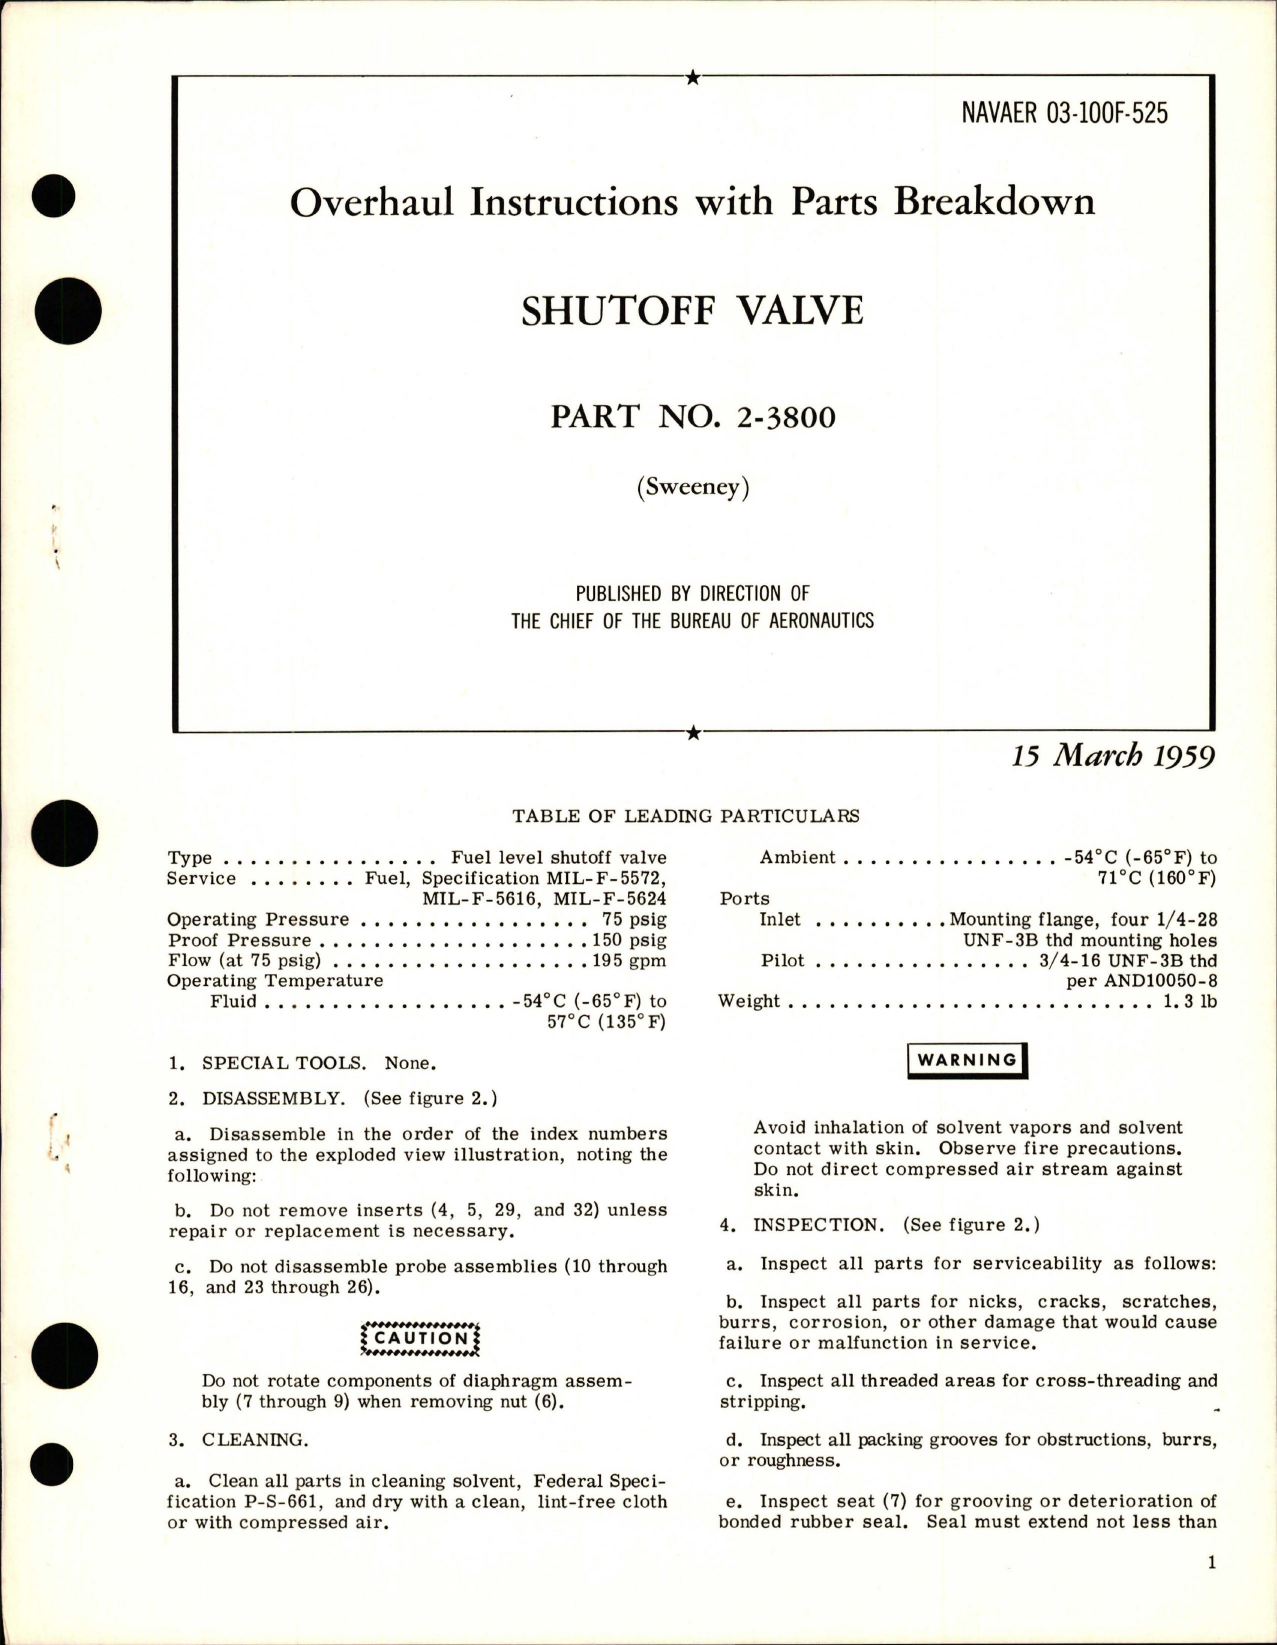 Sample page 1 from AirCorps Library document: Overhaul Instructions for Parts Breakdown for Shutoff Valve - Part 2-3800 